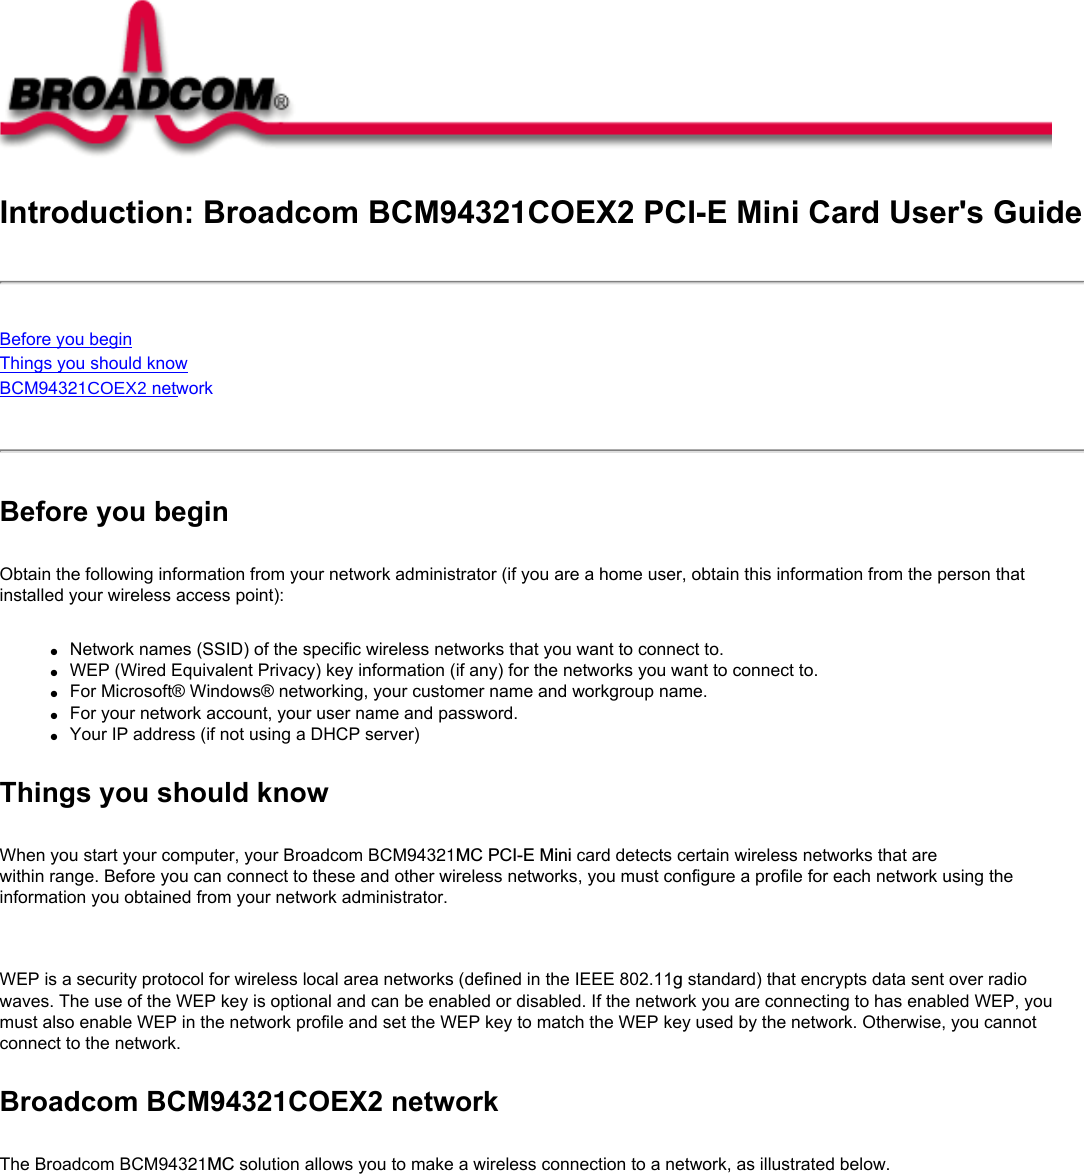 Introduction: Broadcom BCM94321COEX2 PCI-E Mini Card User&apos;s GuideBefore you beginThings you should knowBCM94321COEX2 network Before you beginObtain the following information from your network administrator (if you are a home user, obtain this information from the person that installed your wireless access point):●     Network names (SSID) of the specific wireless networks that you want to connect to.●     WEP (Wired Equivalent Privacy) key information (if any) for the networks you want to connect to.●     For Microsoft® Windows® networking, your customer name and workgroup name.●     For your network account, your user name and password.●     Your IP address (if not using a DHCP server)Things you should knowWhen you start your computer, your Broadcom BCM94321MC PCI-E Mini card detects certain wireless networks that are within range. Before you can connect to these and other wireless networks, you must configure a profile for each network using the information you obtained from your network administrator.   WEP is a security protocol for wireless local area networks (defined in the IEEE 802.11g standard) that encrypts data sent over radio waves. The use of the WEP key is optional and can be enabled or disabled. If the network you are connecting to has enabled WEP, you must also enable WEP in the network profile and set the WEP key to match the WEP key used by the network. Otherwise, you cannot connect to the network.Broadcom BCM94321COEX2 networkThe Broadcom BCM94321MC solution allows you to make a wireless connection to a network, as illustrated below.